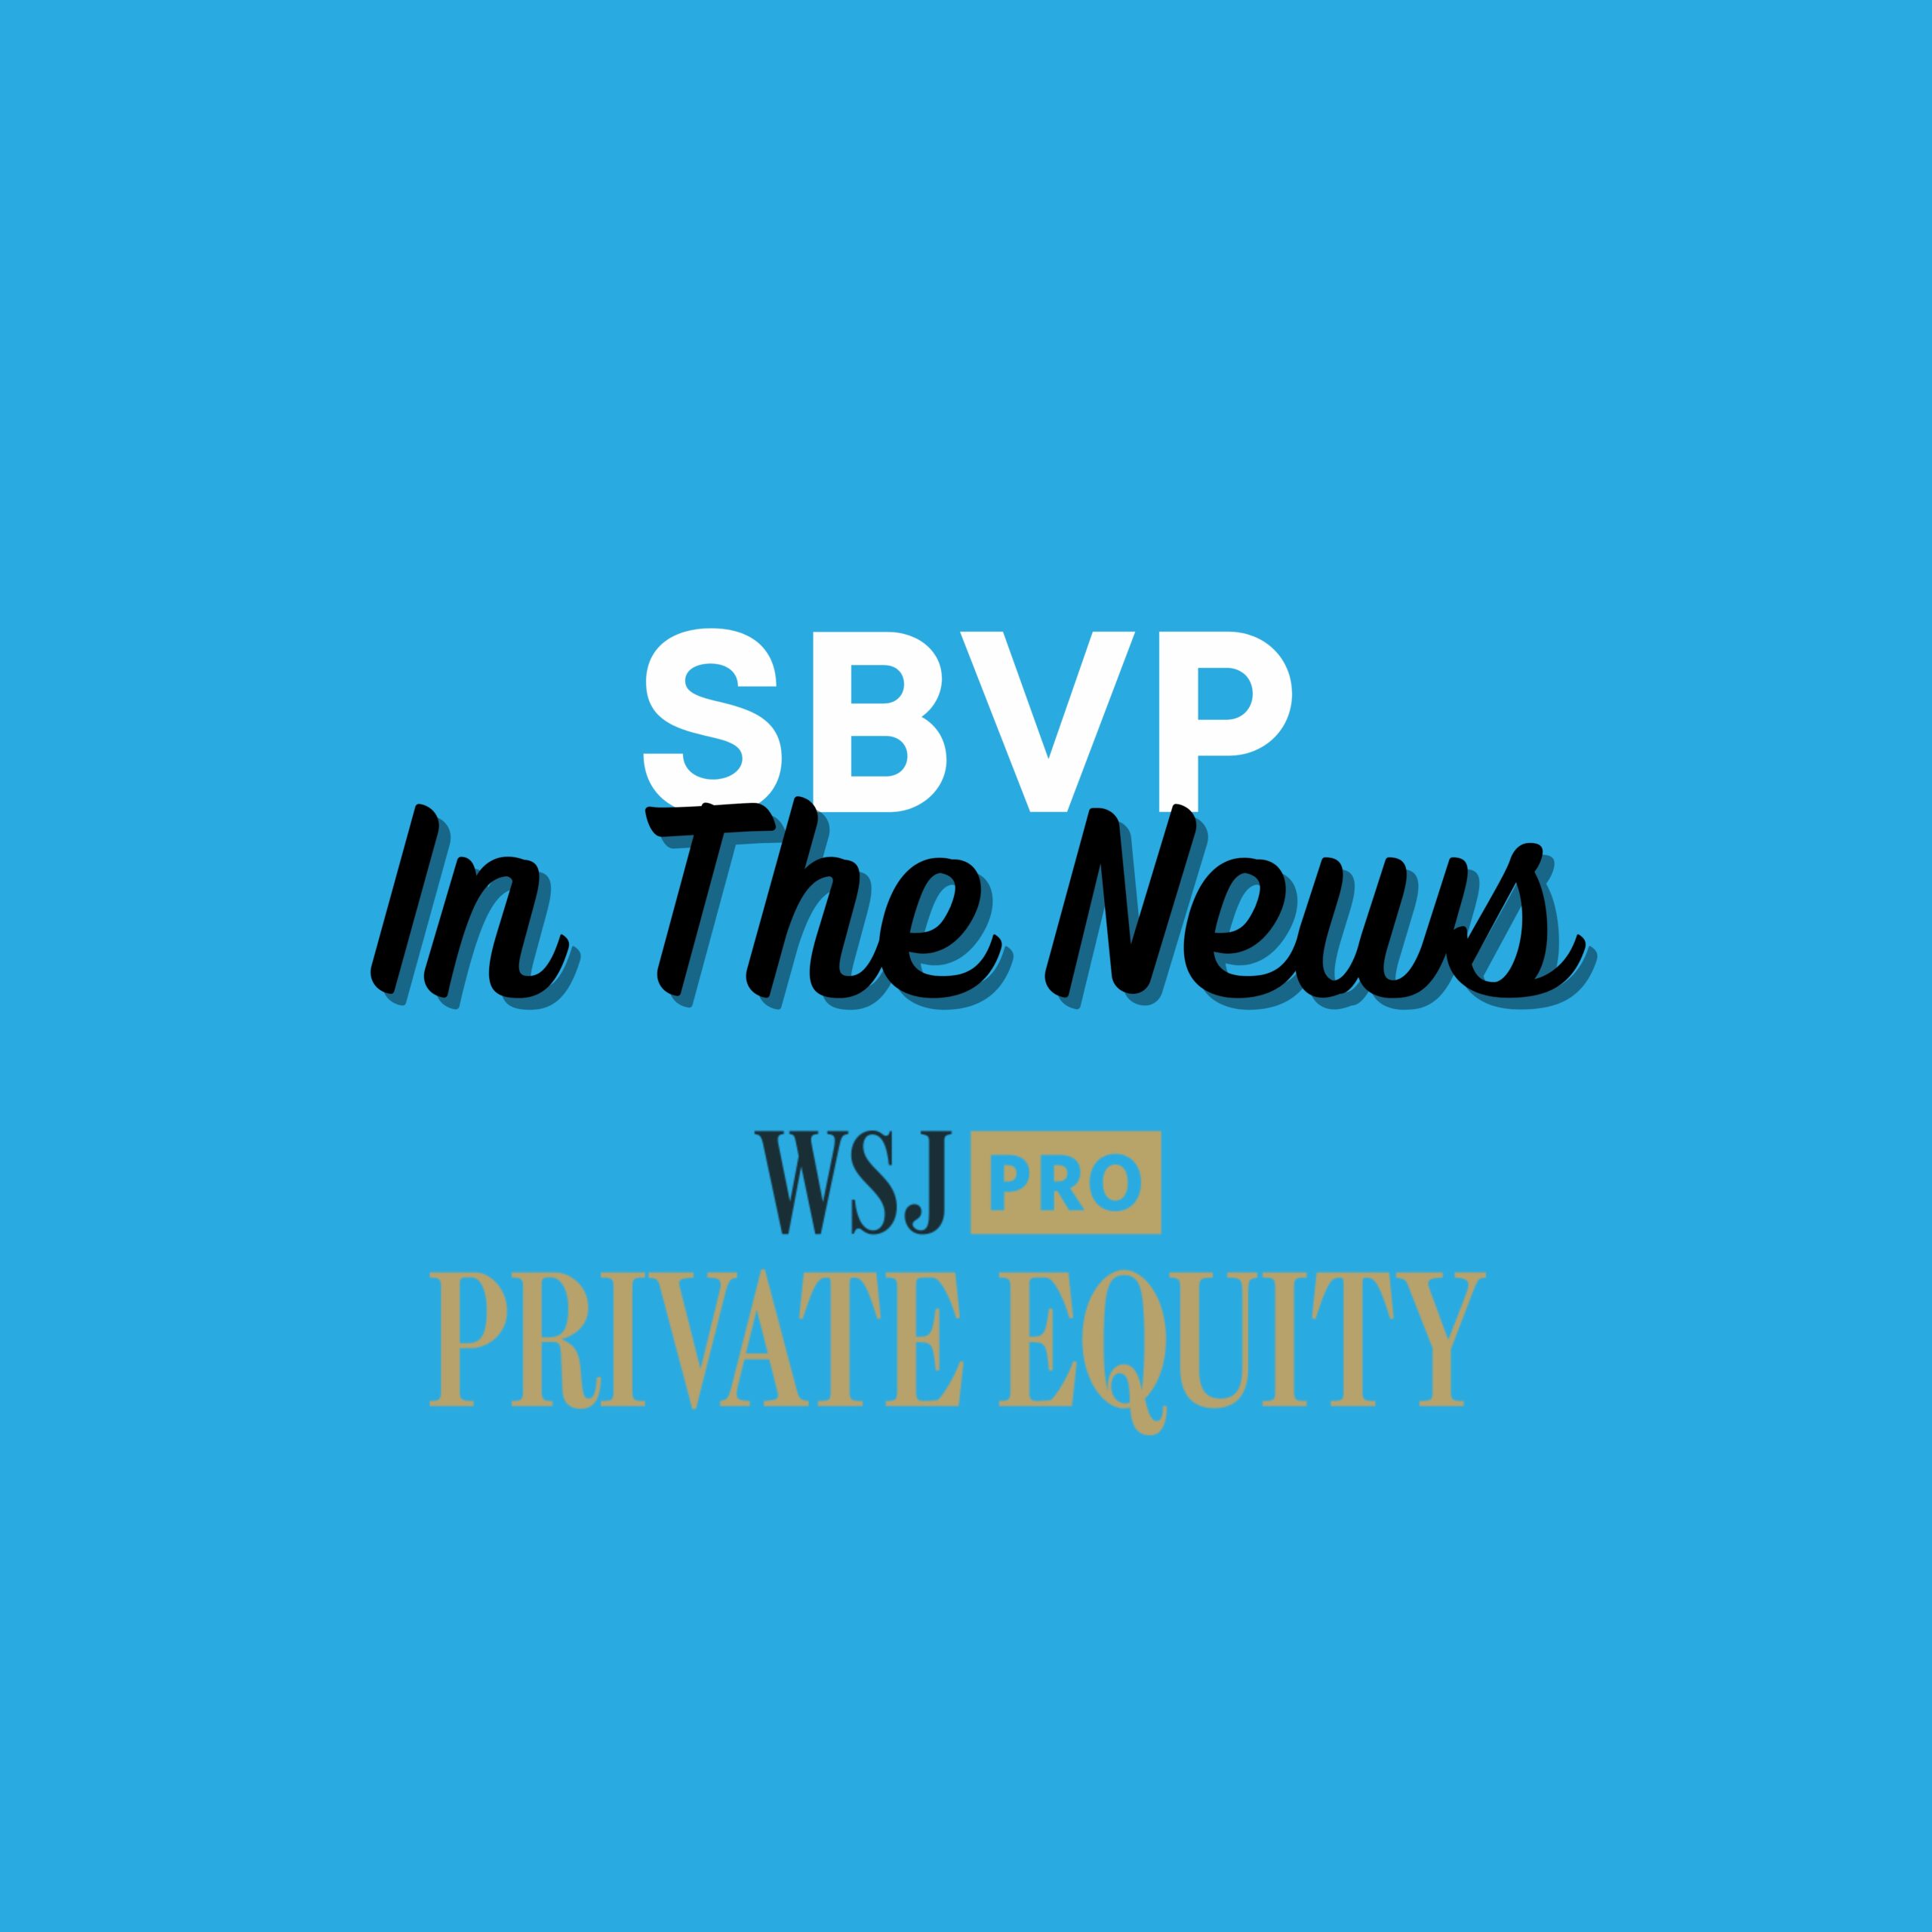 Santa Barbara Venture Partners Featured in The Wall Street Journal